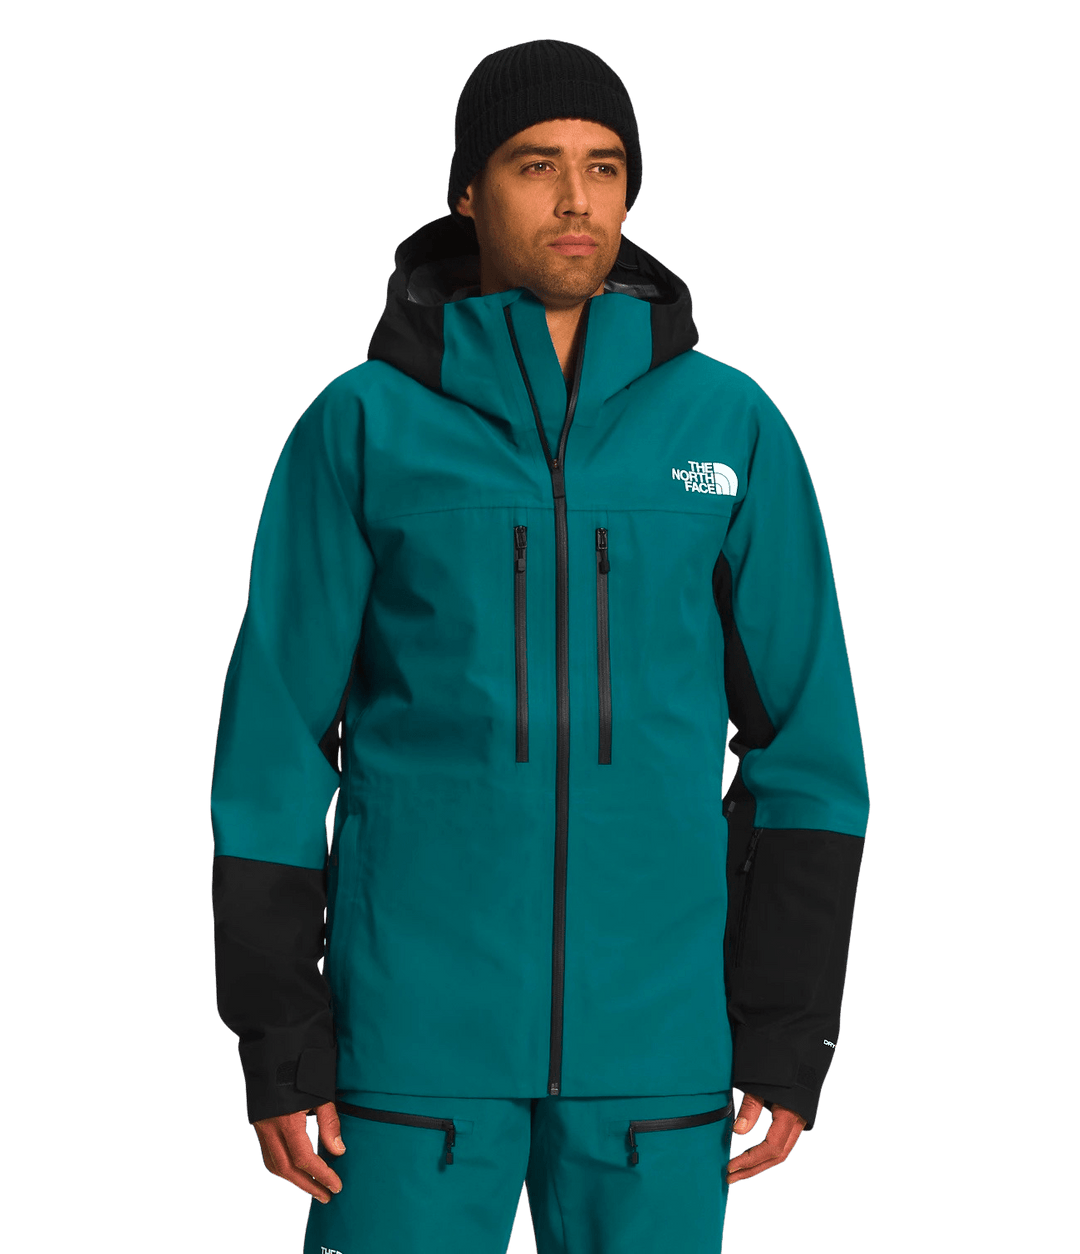 THE NORTH FACE JACKET CEPTOR